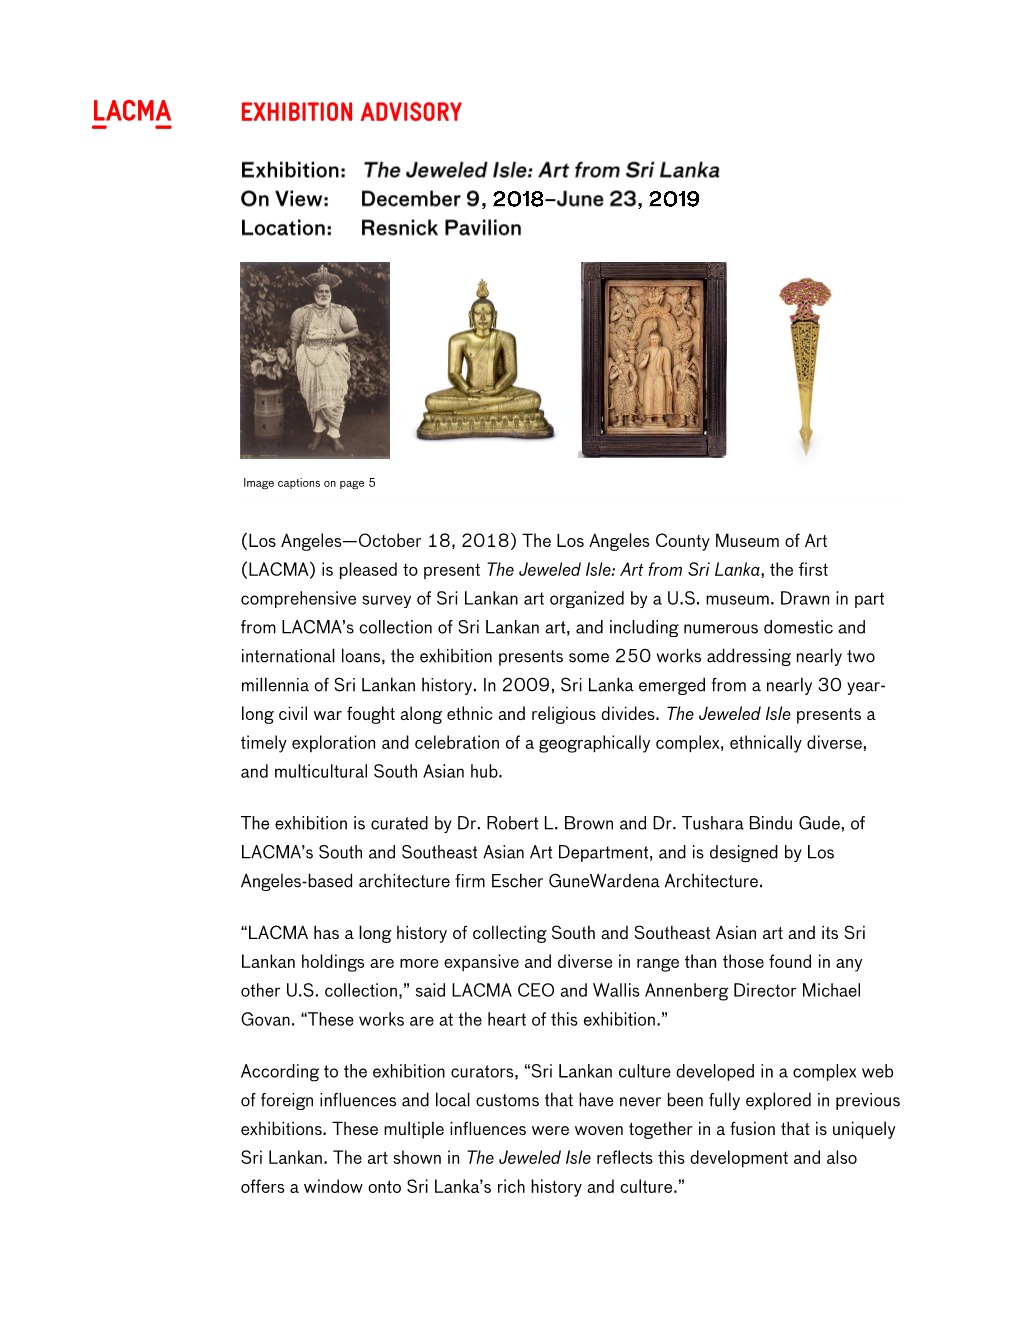 Is Pleased to Present the Jeweled Isle: Art from Sri Lanka, the First Comprehensive Survey of Sri Lankan Art Organized by a U.S